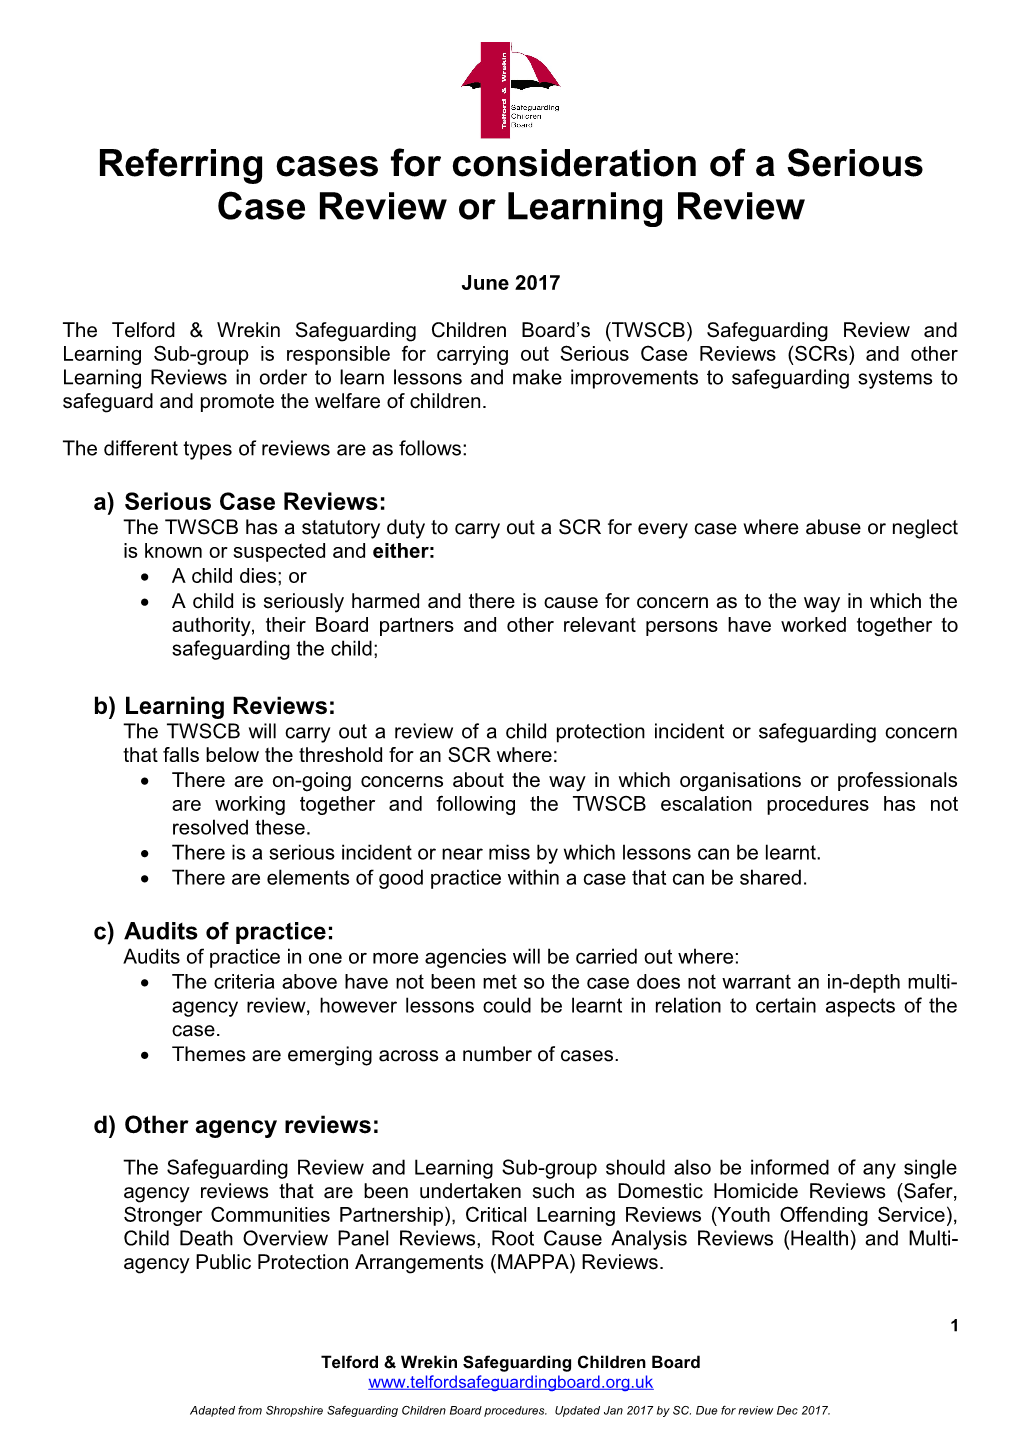 Referring Cases for Consideration of a Serious Case Review Or Learning Review